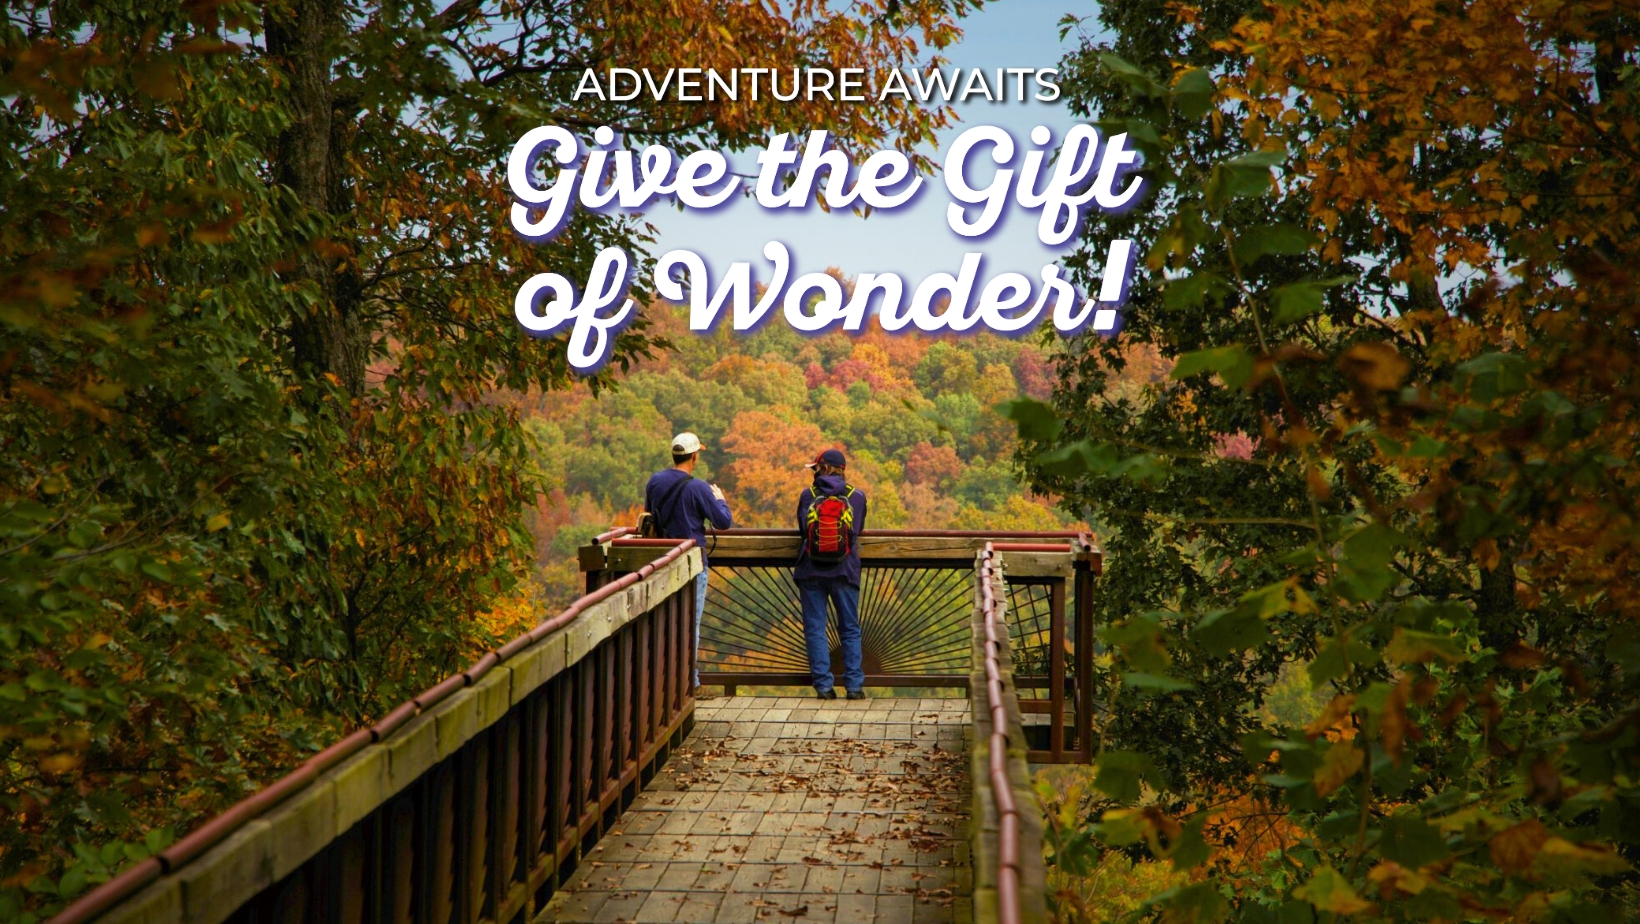 Adventures awaits - Give the Gift of Wonder